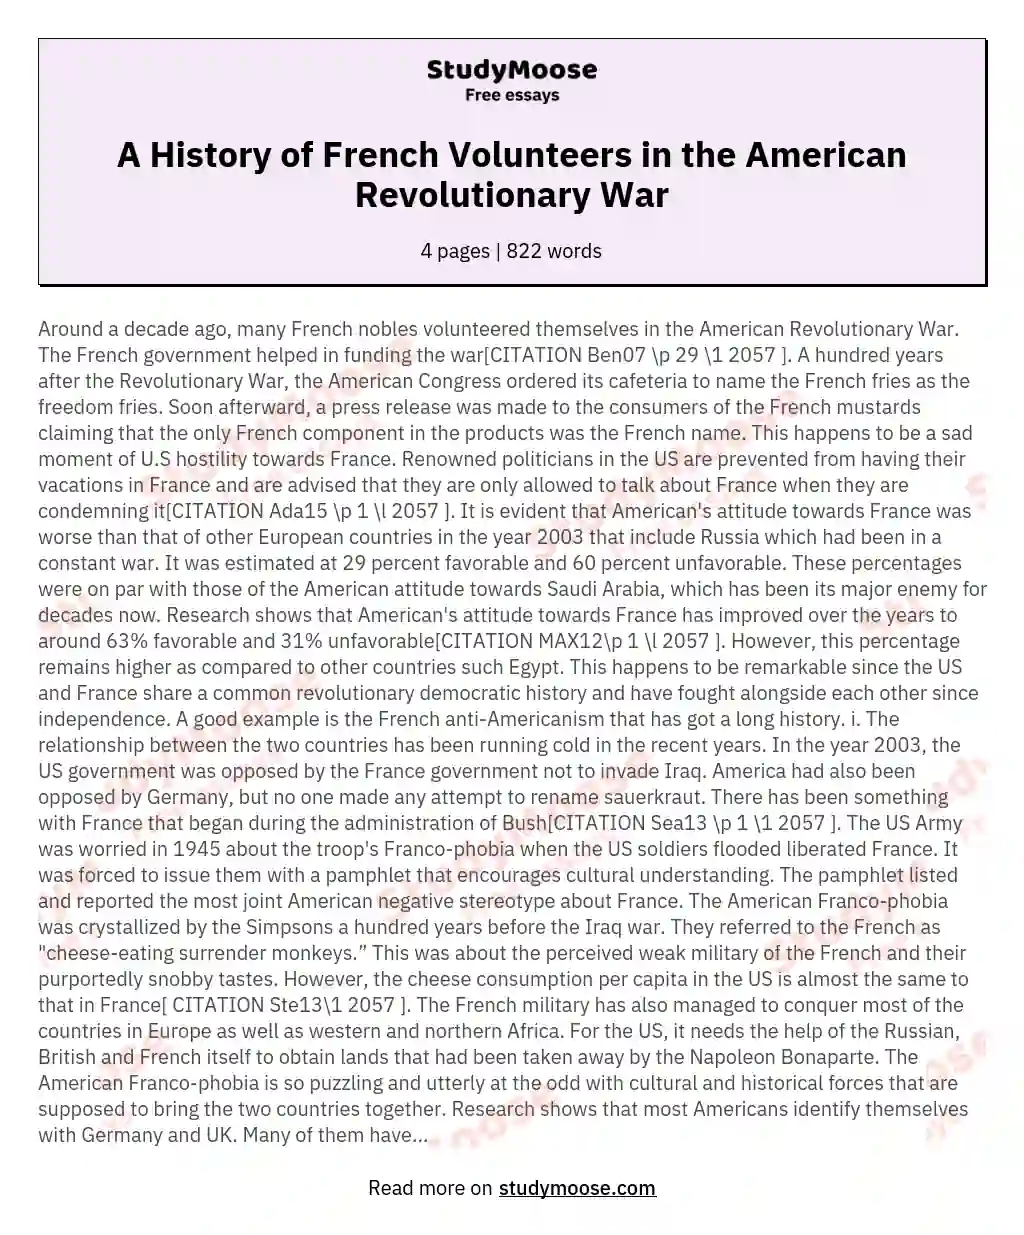 A History of French Volunteers in the American Revolutionary War essay